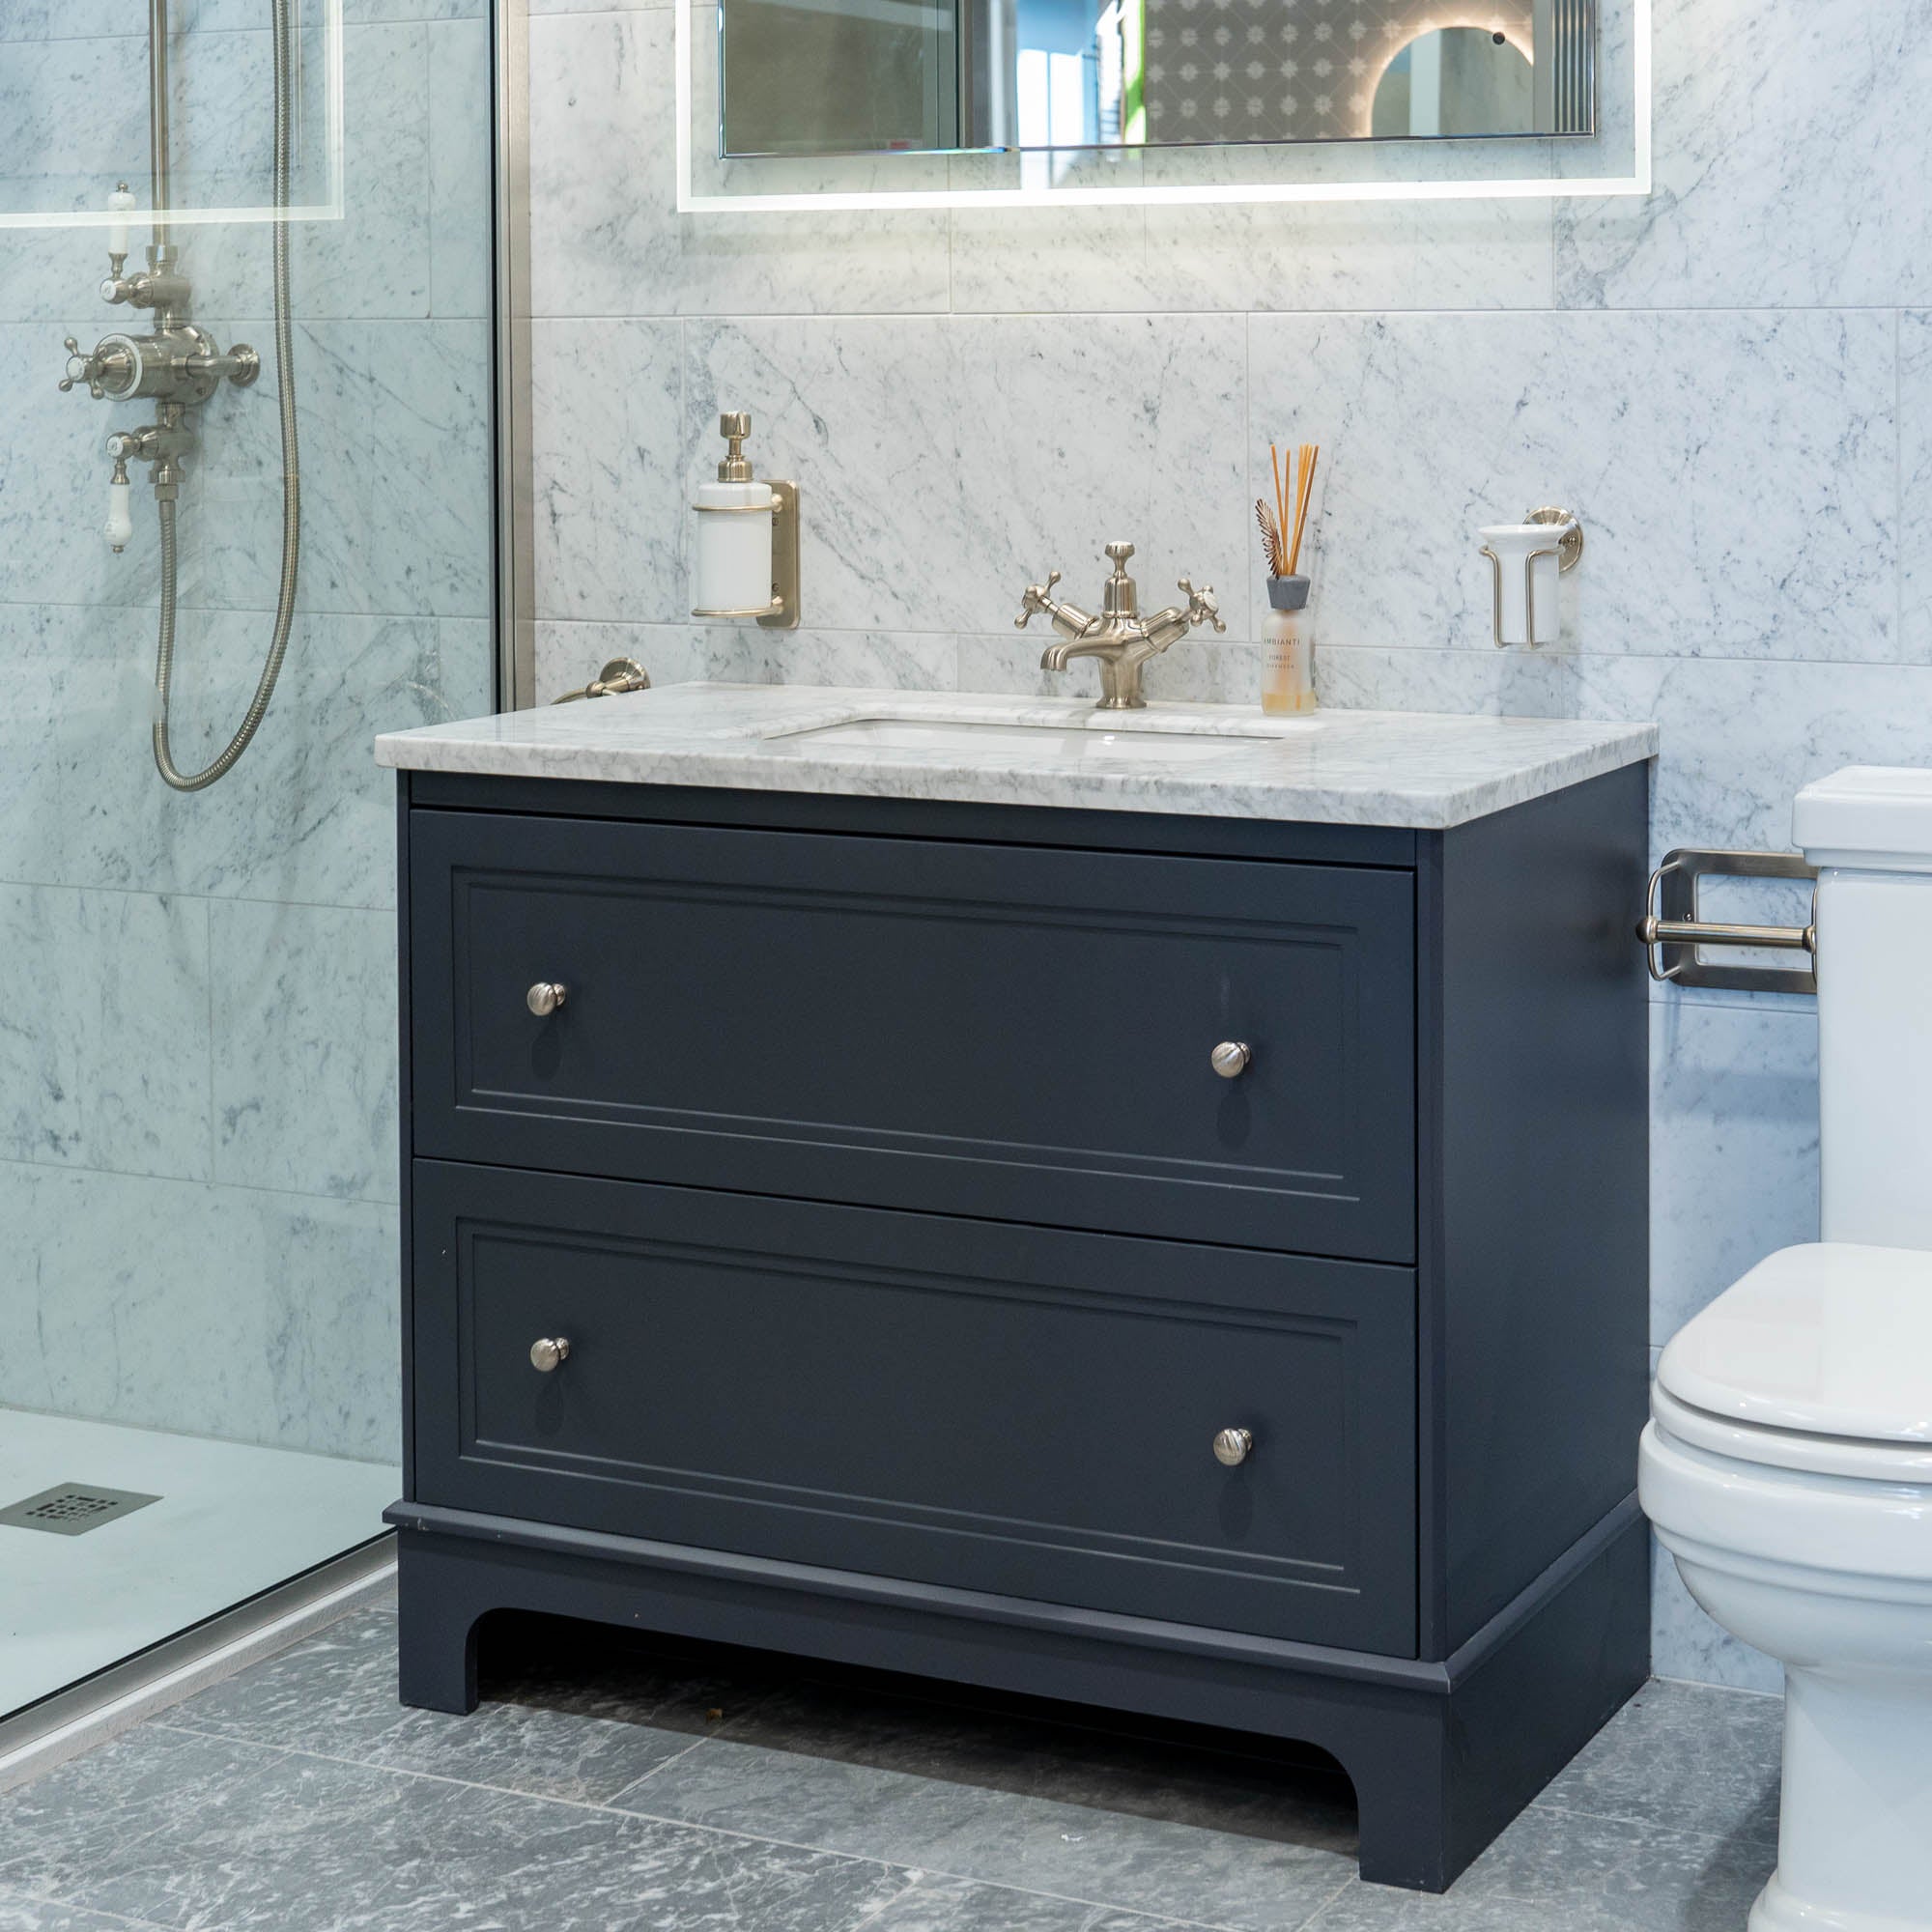 Granlusso Shelbourne Floorstanding Vanity Unit with Real Marble Worktop and Basin